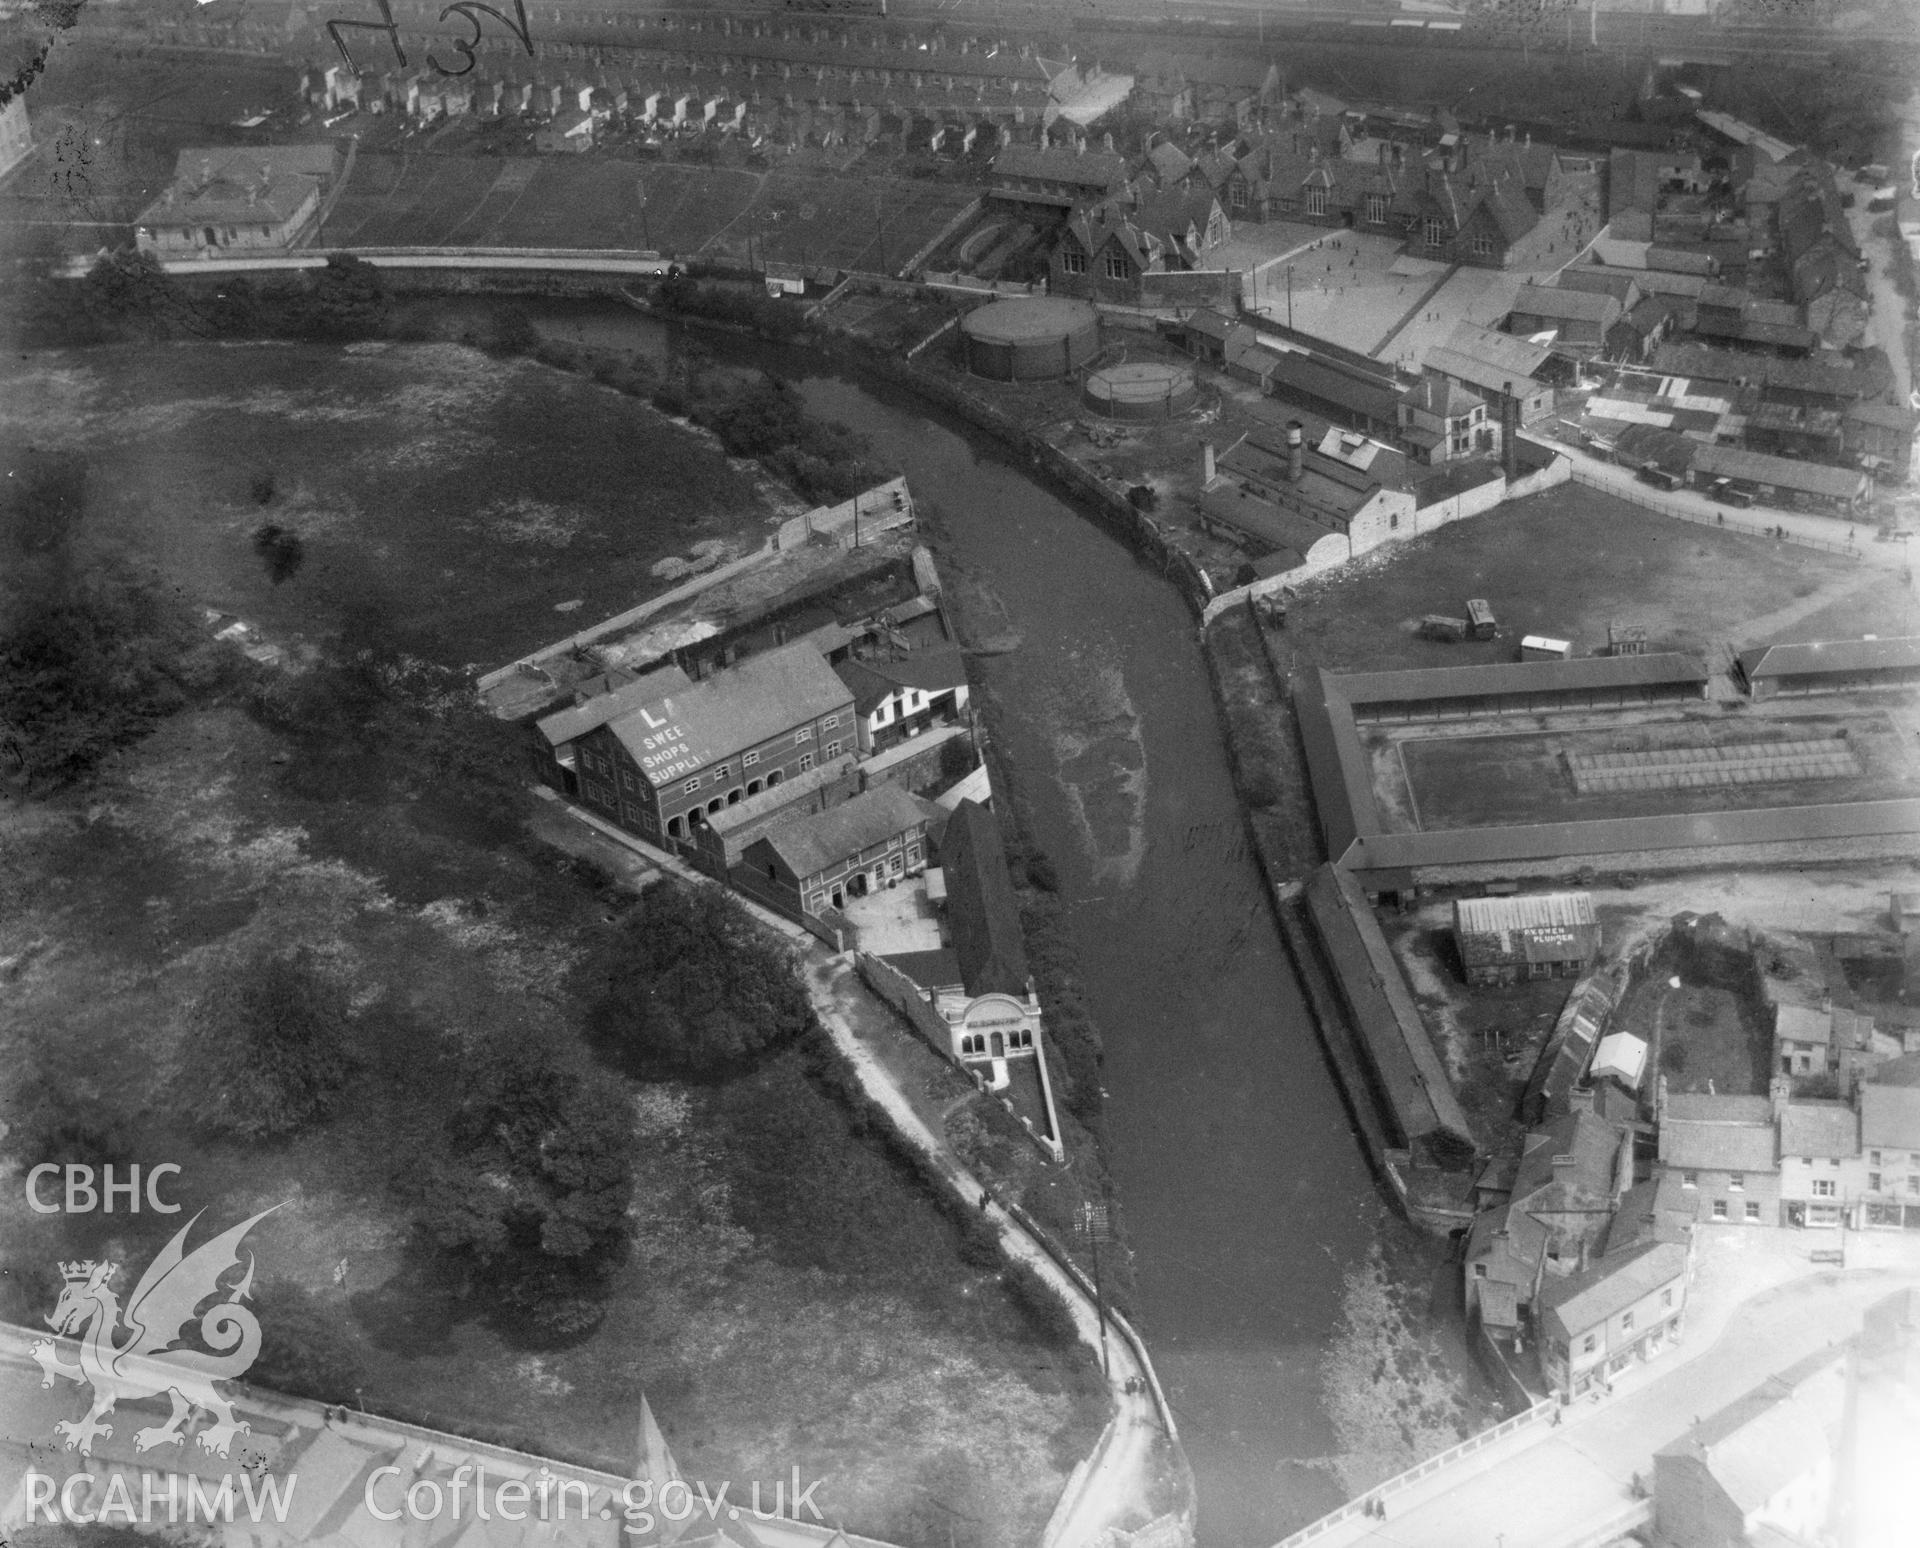 View of Bridgend showing sweet factory, oblique aerial view. 5?x4? black and white glass plate negative.